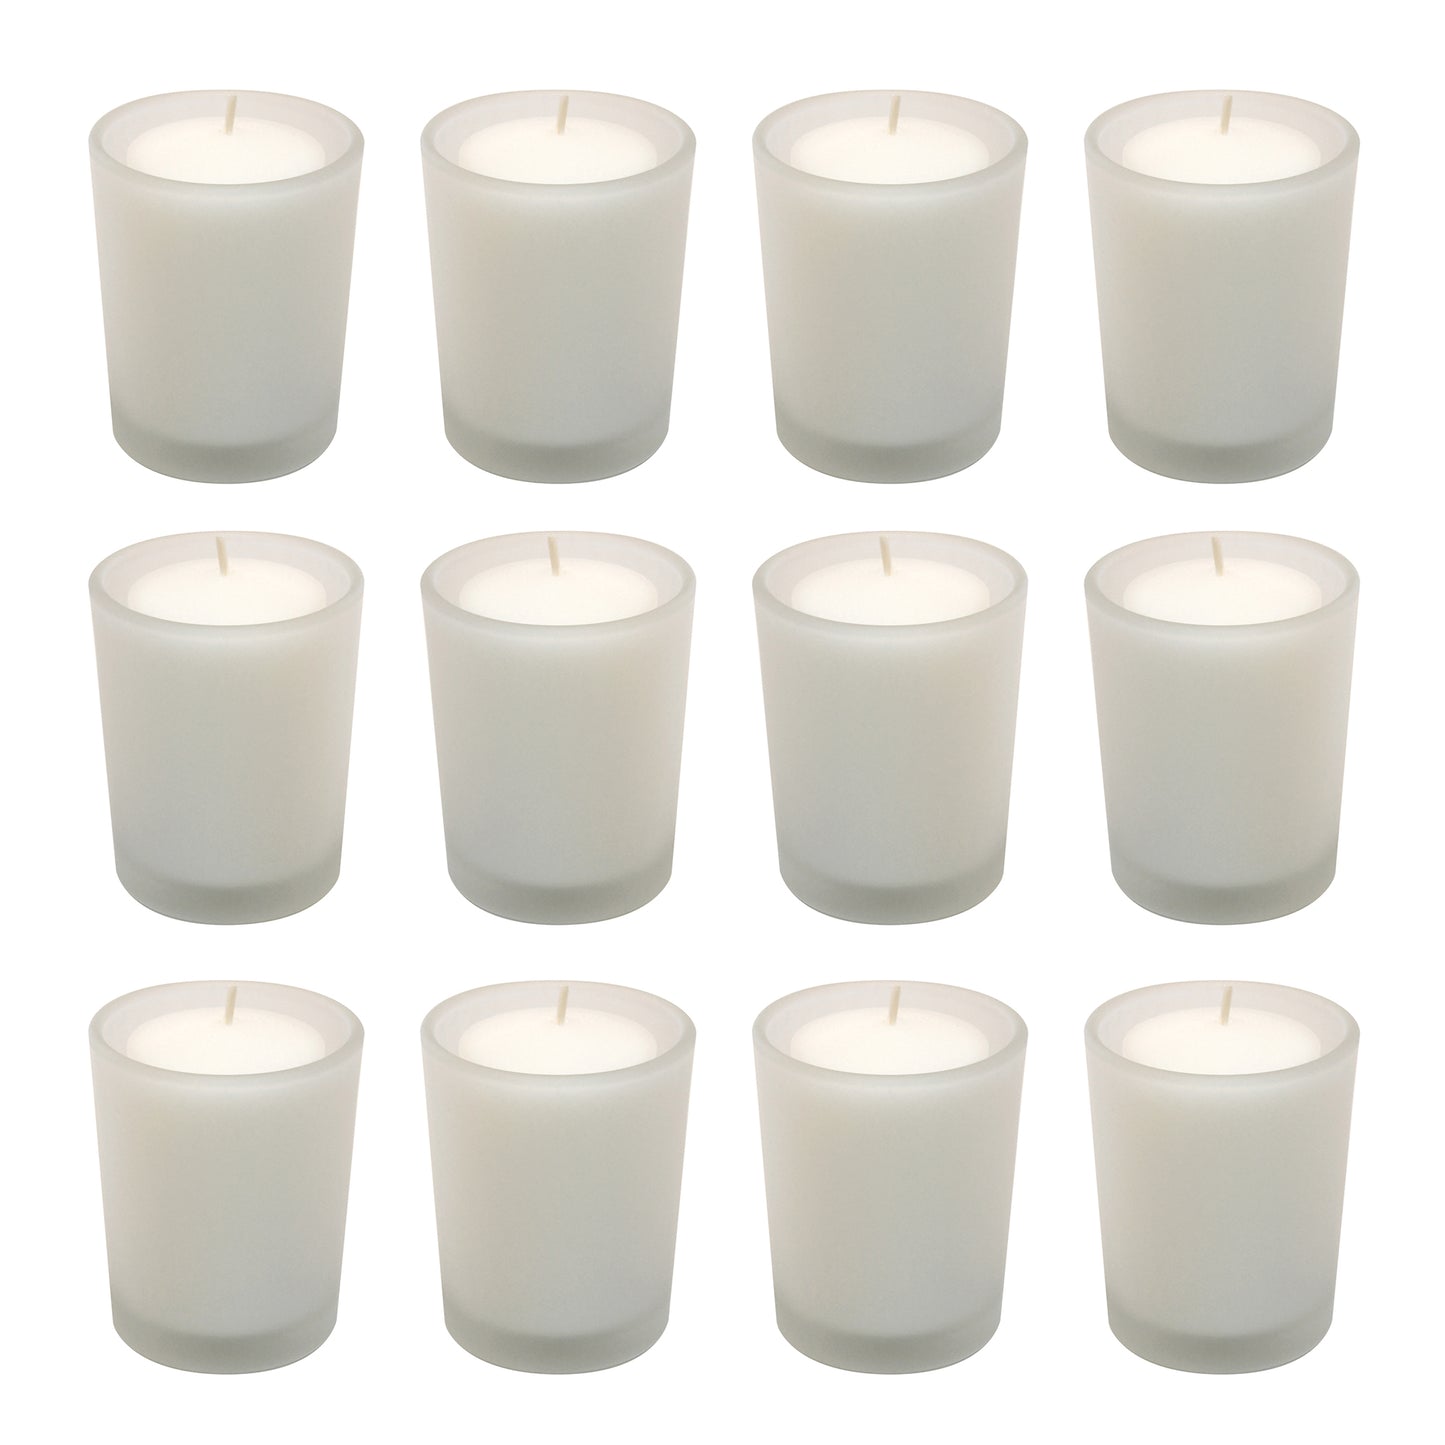 Votive Candles in Frosted Glass Holders - Set of 12